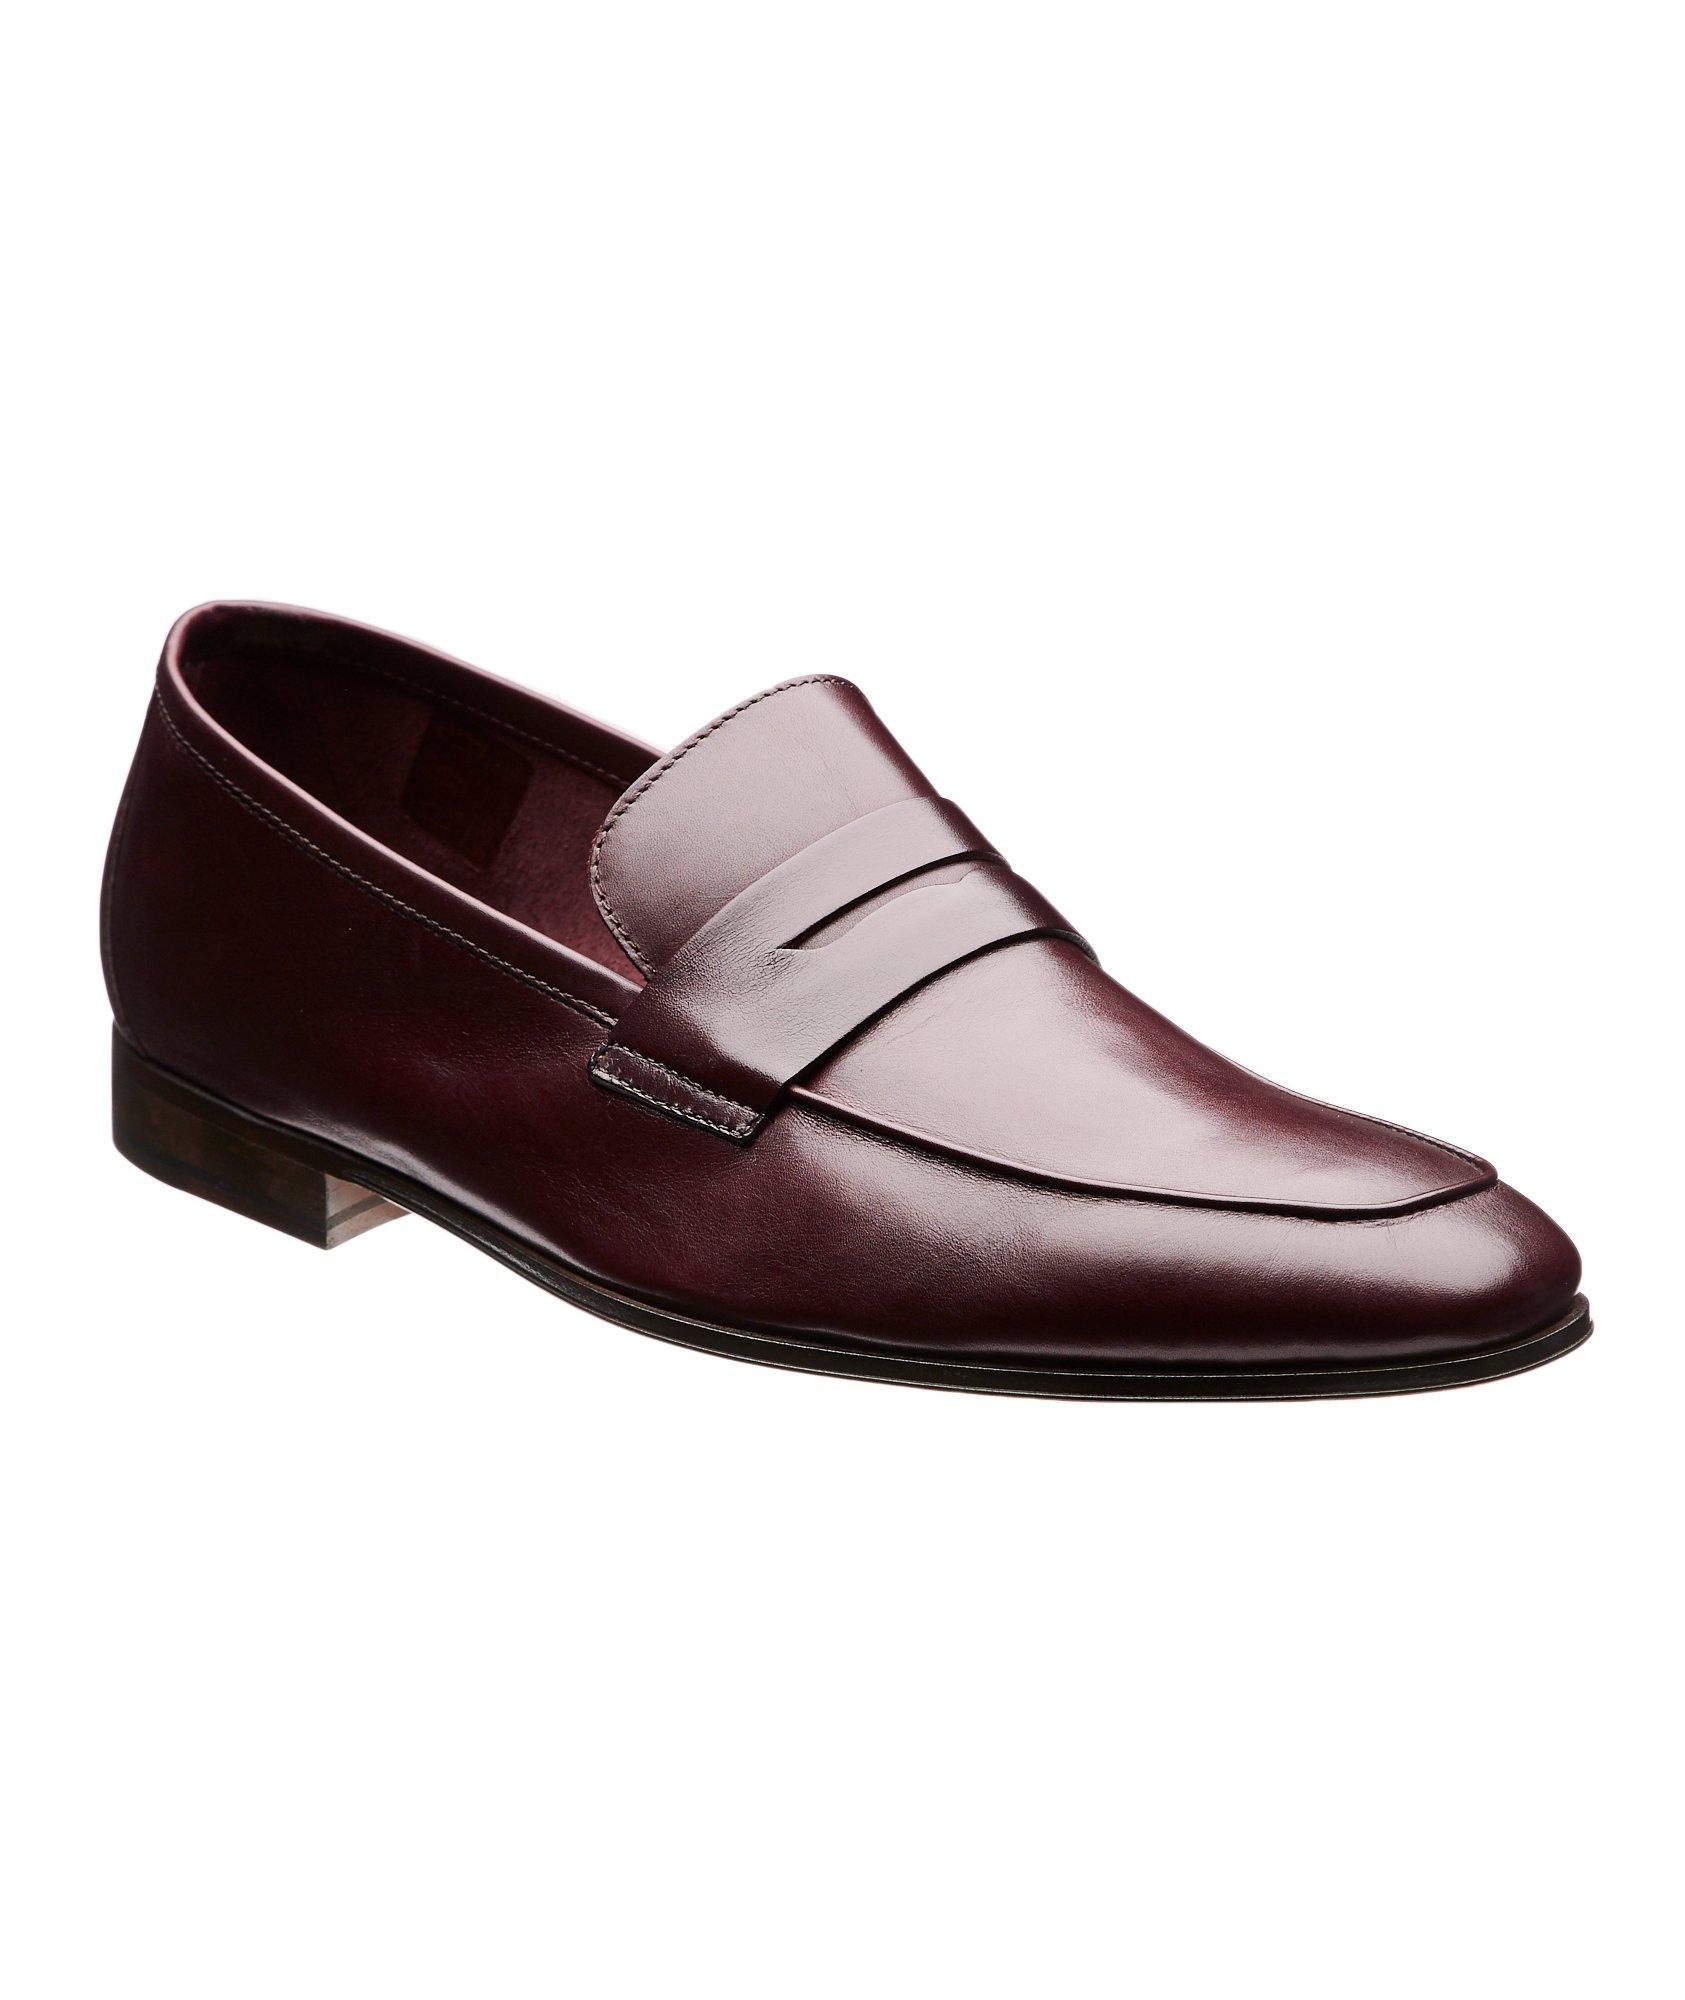 Leather Penny Loafers image 0